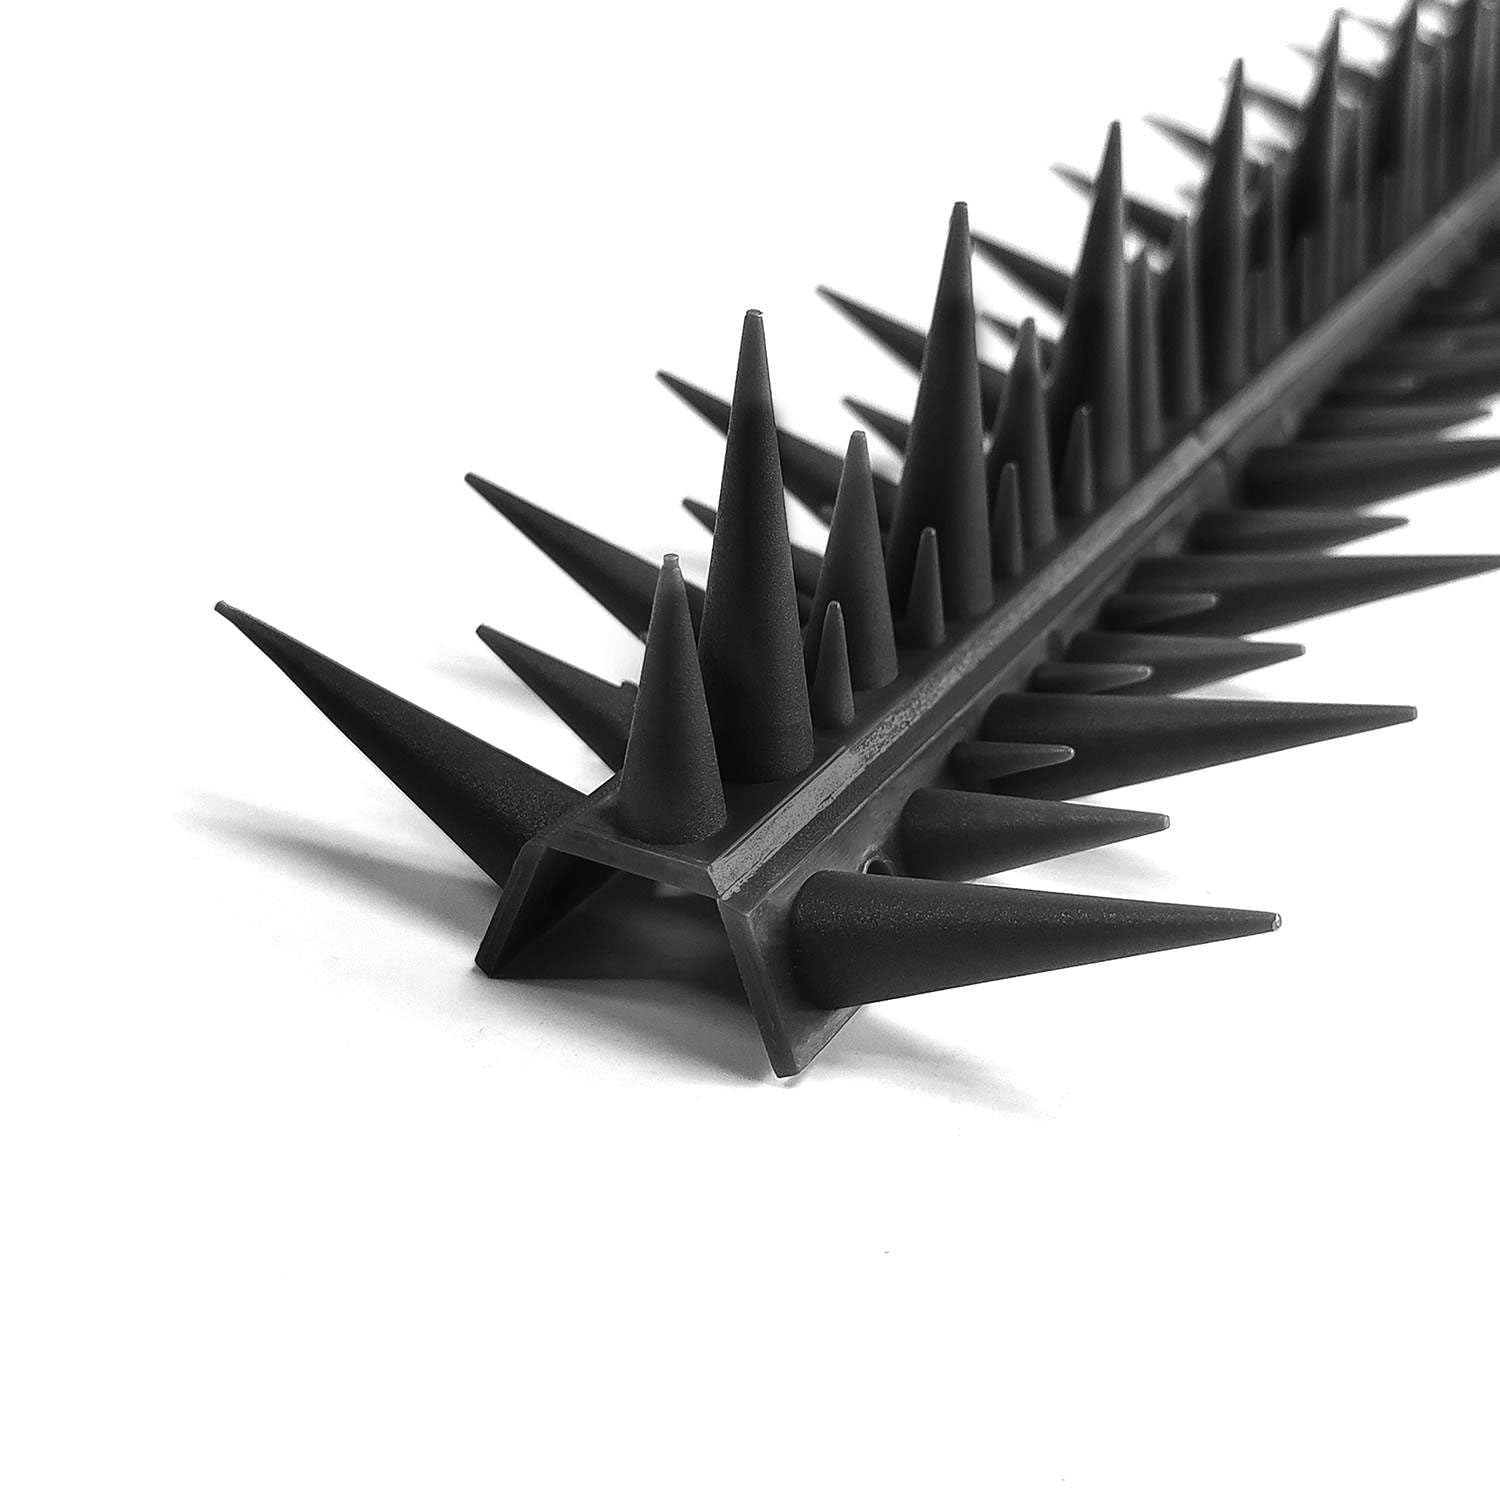 BUGG OFF - Bird & Rodent Spikes, Unique Spike Pattern effecitviely deteres Pesky Pigeons, Squirrels, Raccoons. Installs on Fences, Gates, Roofs, Walls and More! (15 Feet, Black Plastic)